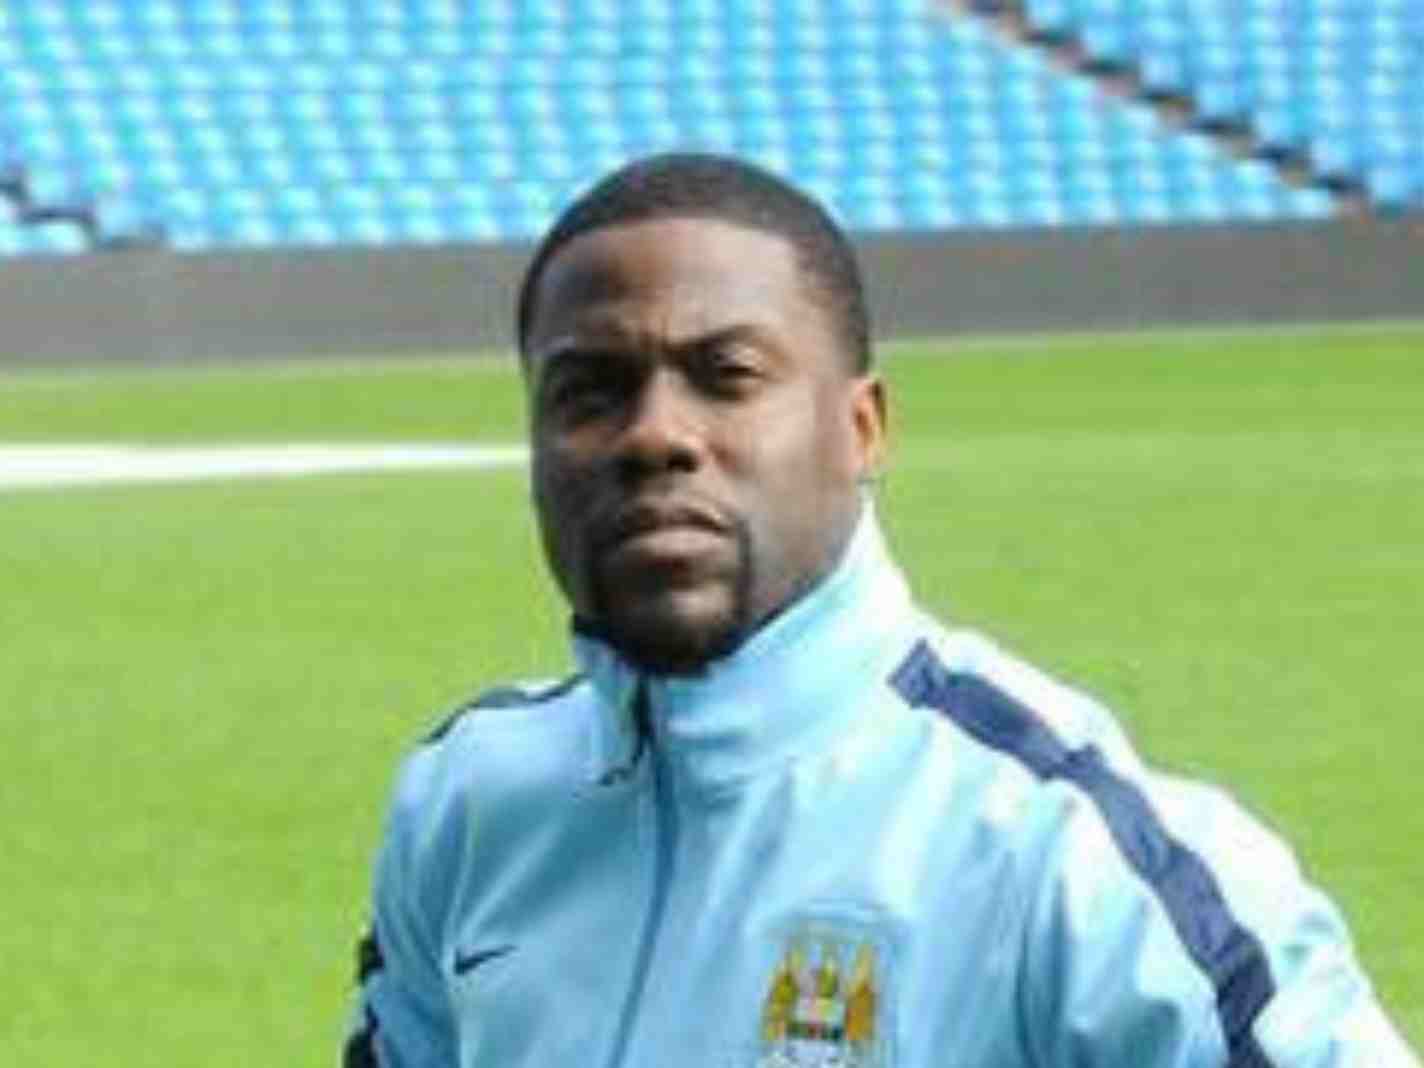 Unpacking the viral photo of Kevin Hart in Man City jacket